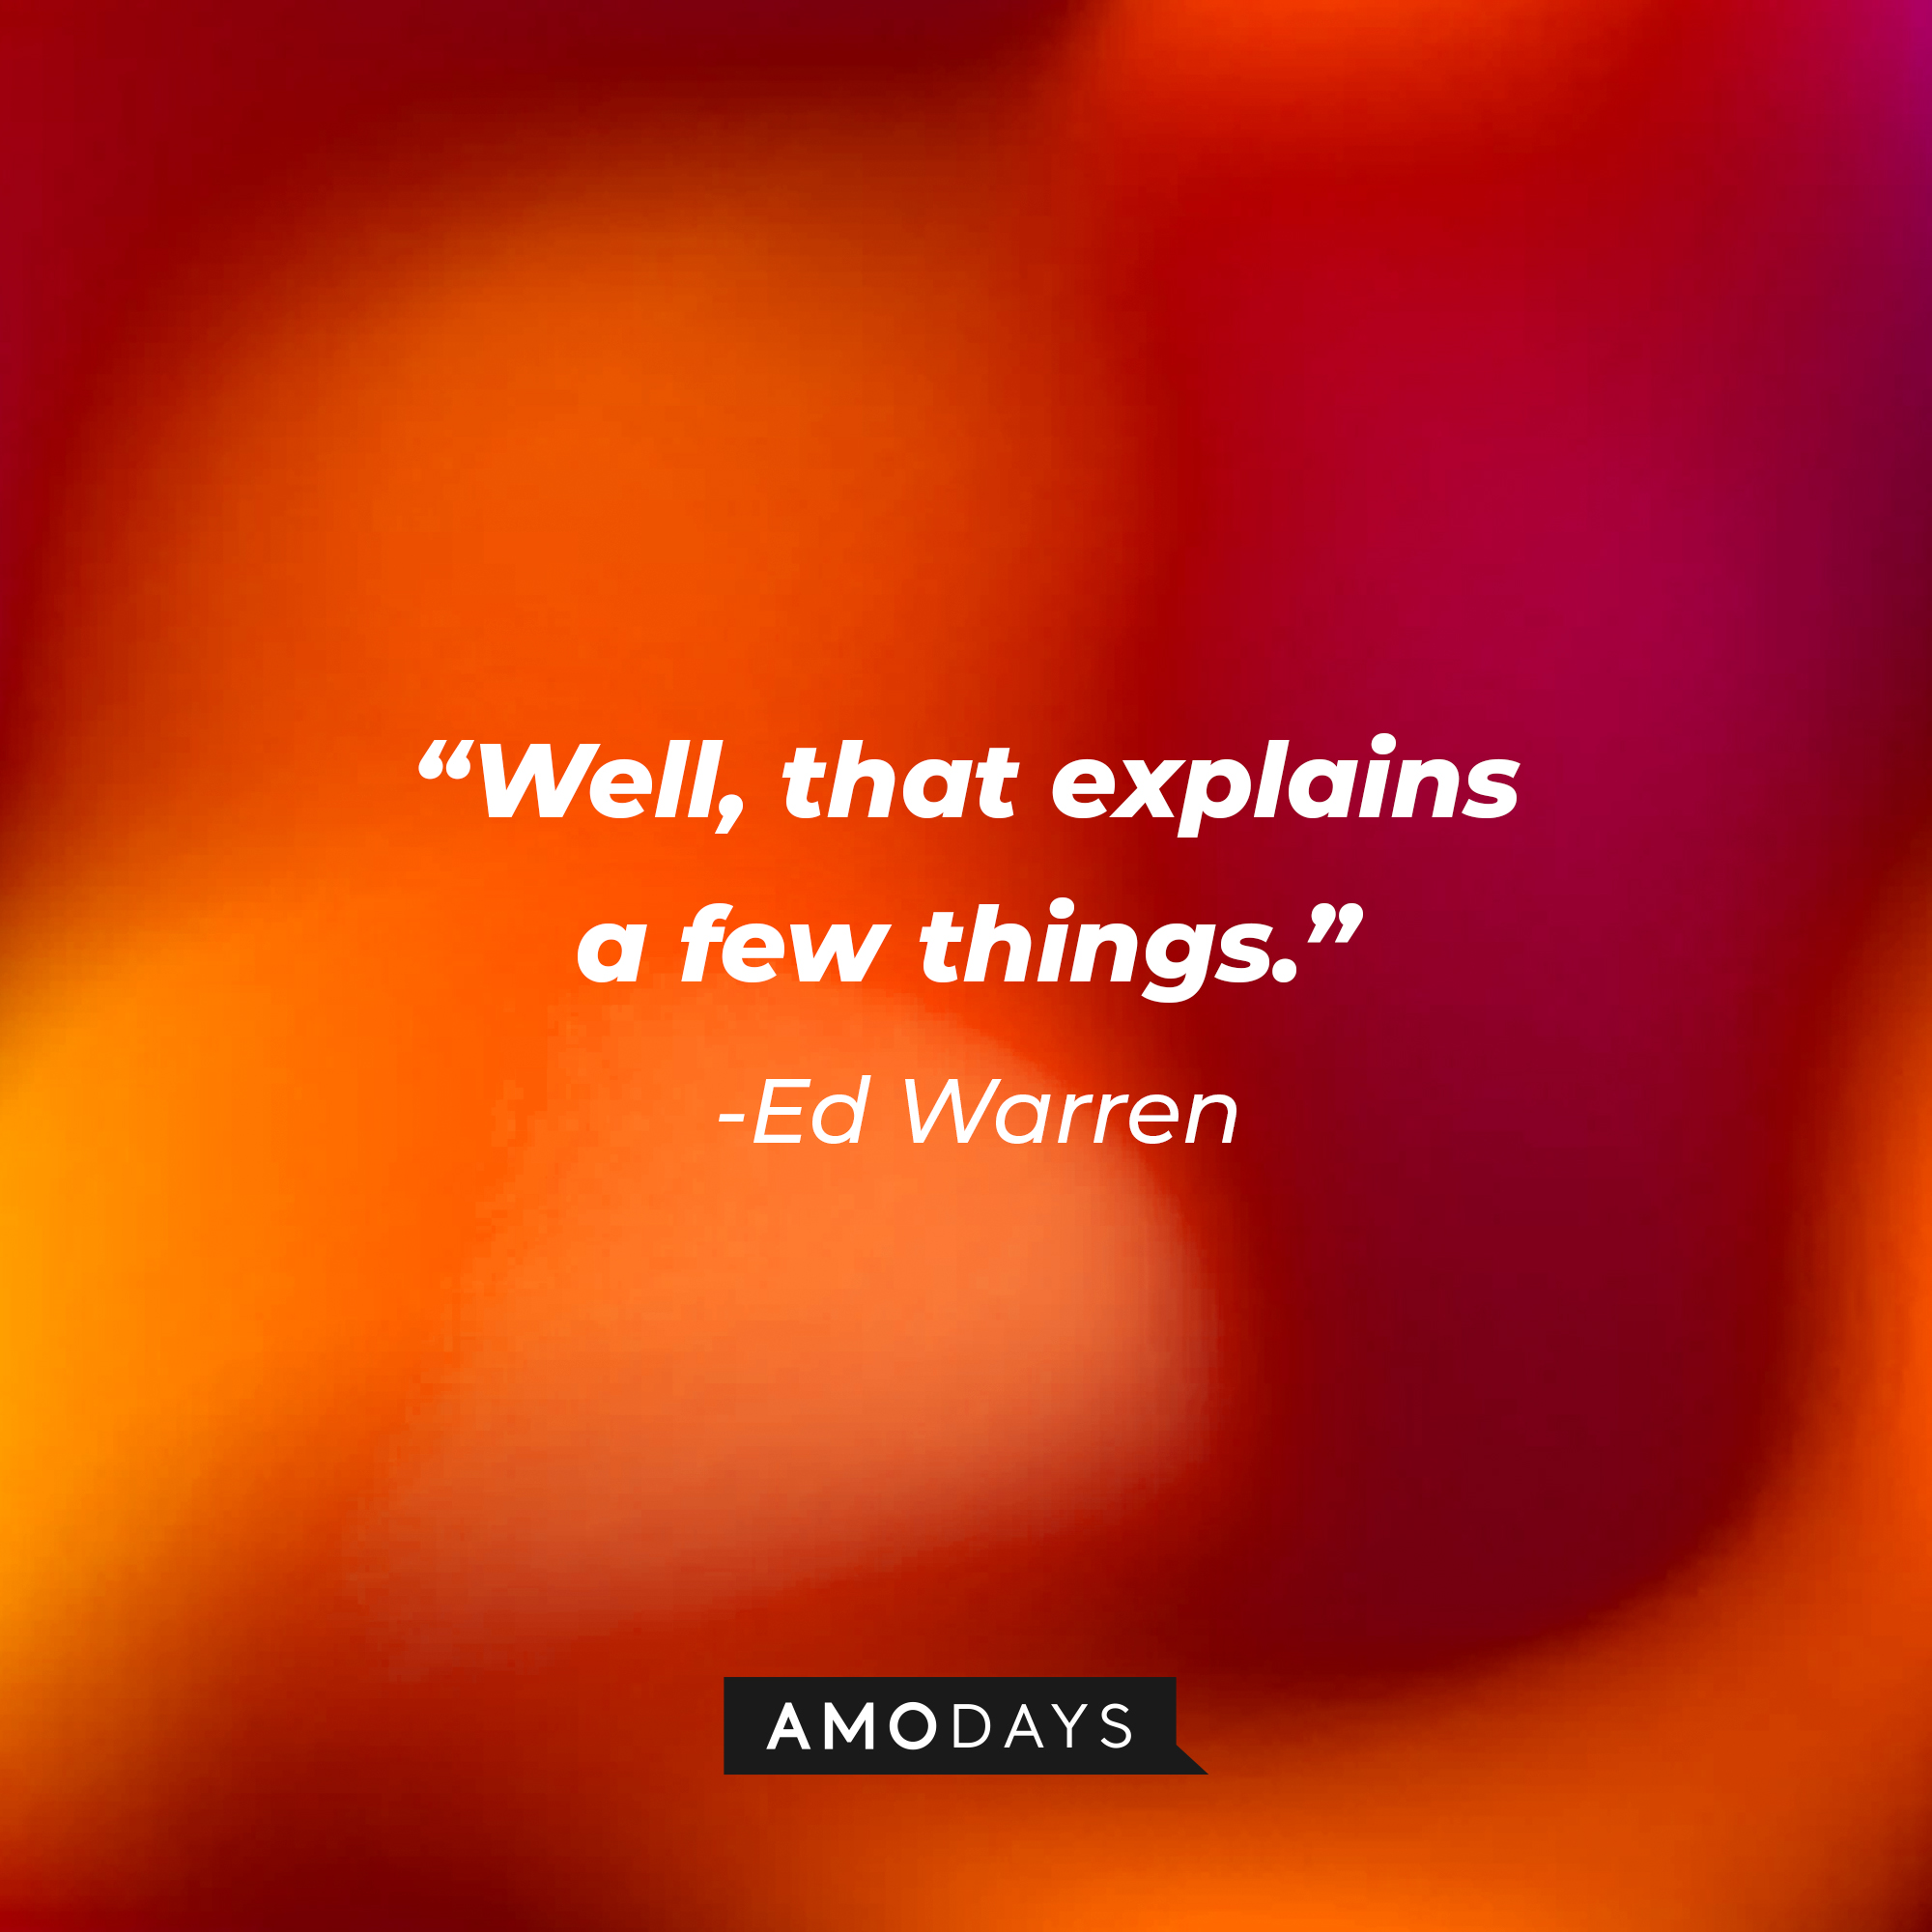 Ed Warren’s quote: "Well, that explains a few things.” | Source: AmoDays